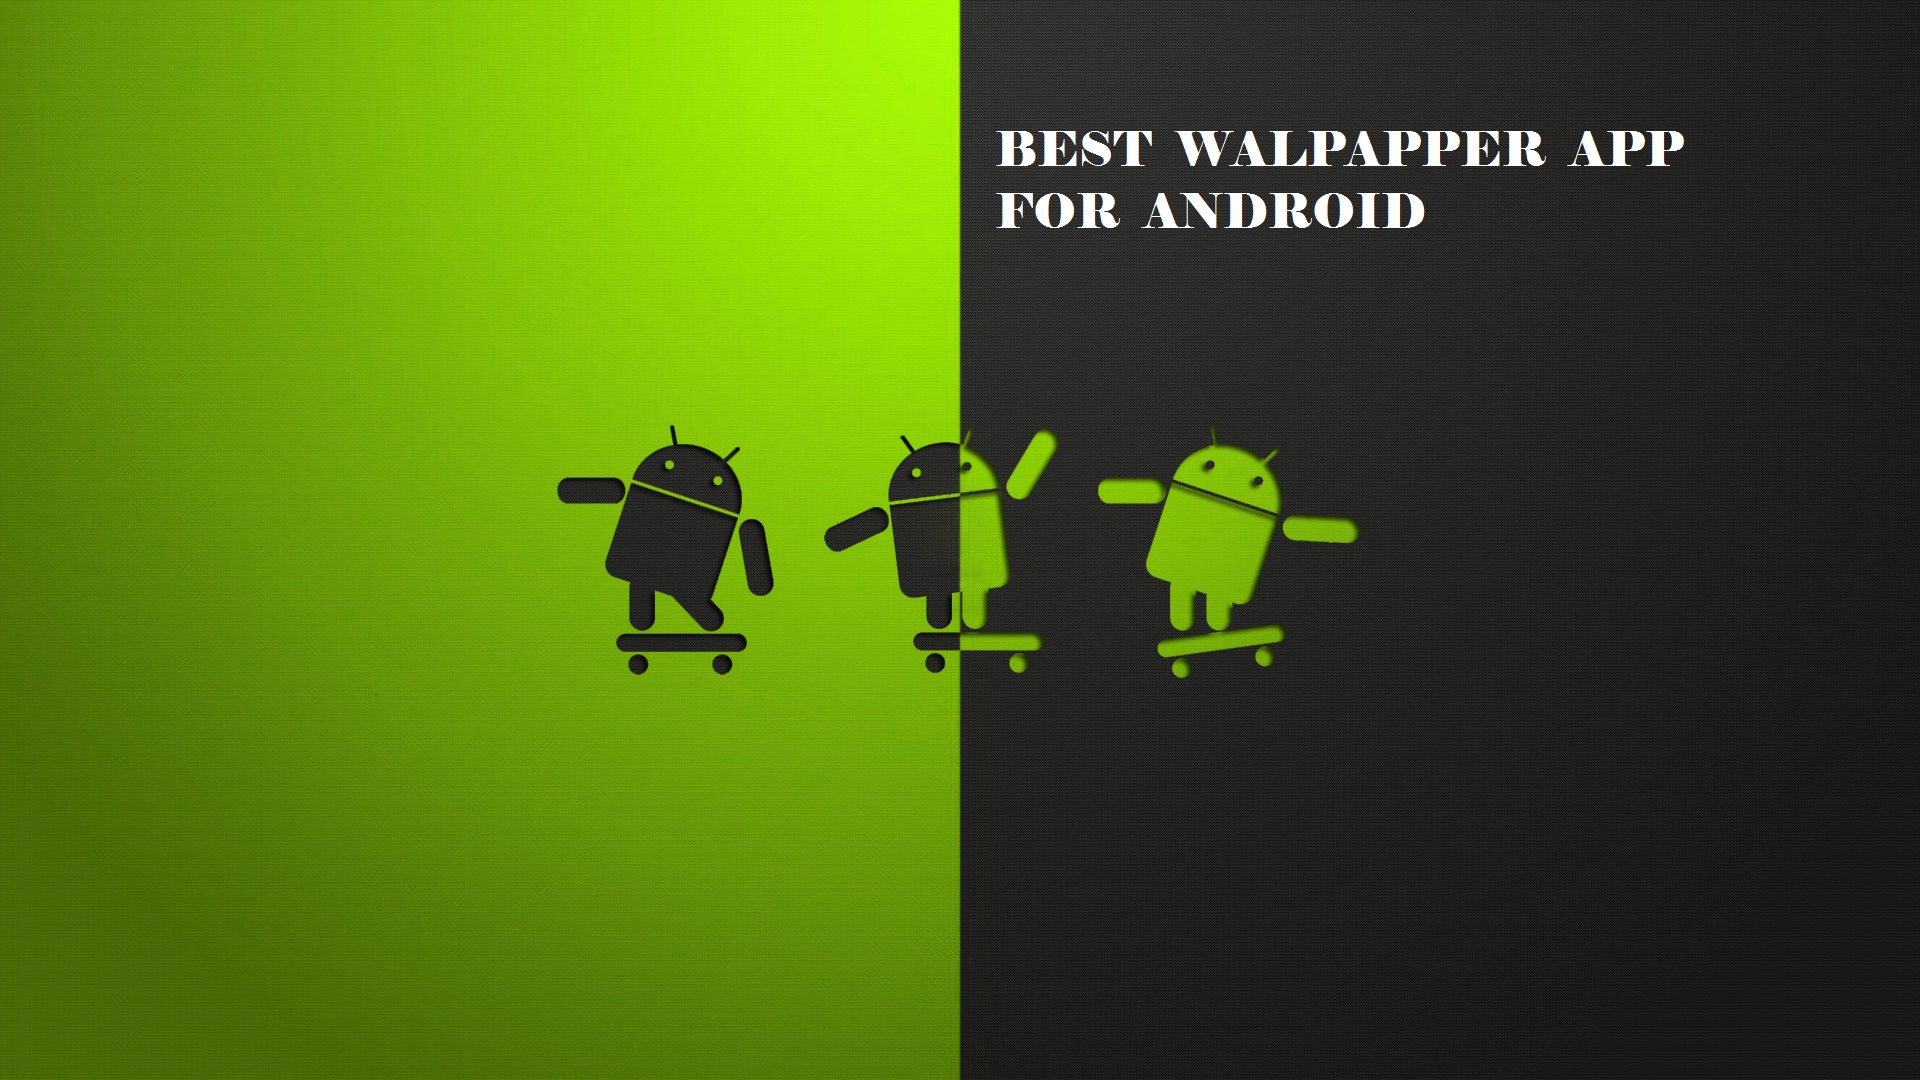 The Best Wallpaper app For Android